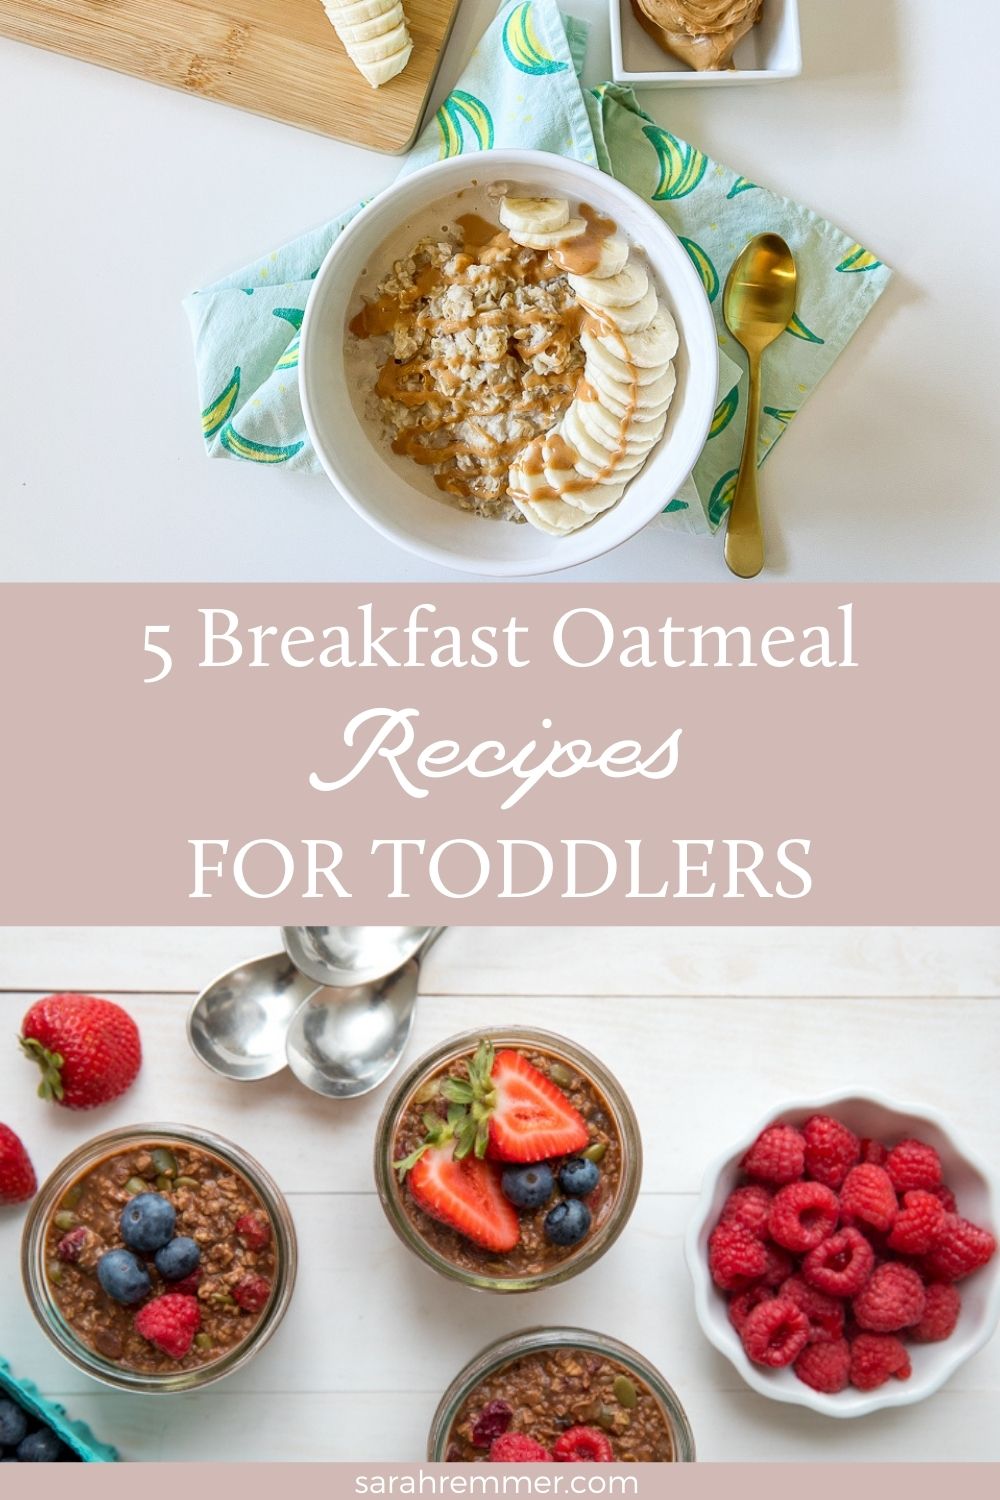 Nutritious, filling and easy, oatmeal is the perfect breakfast for a busy toddler (and big kids too!). These oatmeal recipes for toddlers use large flake oats or steel cut oat for added nutrition.